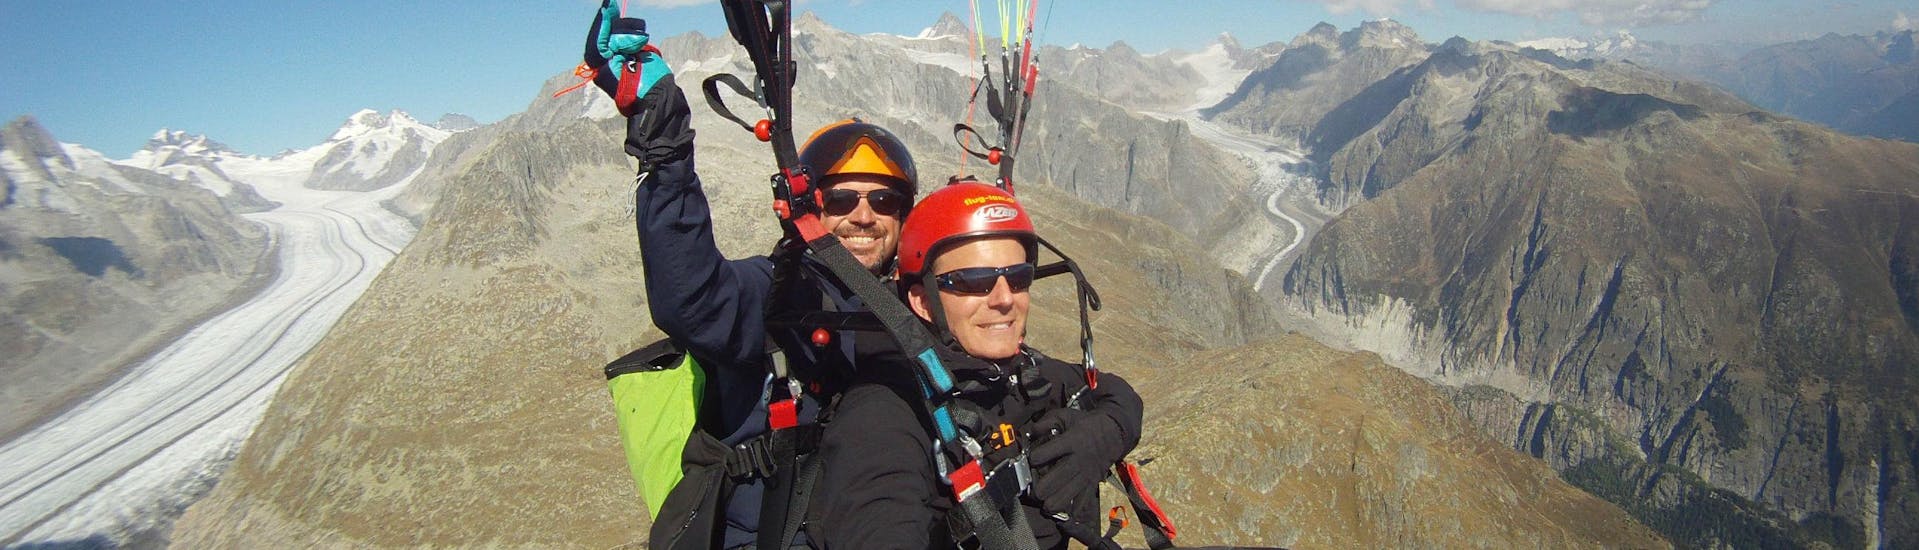 Tandem Paragliding over the Aletsch Arena - High Fly.